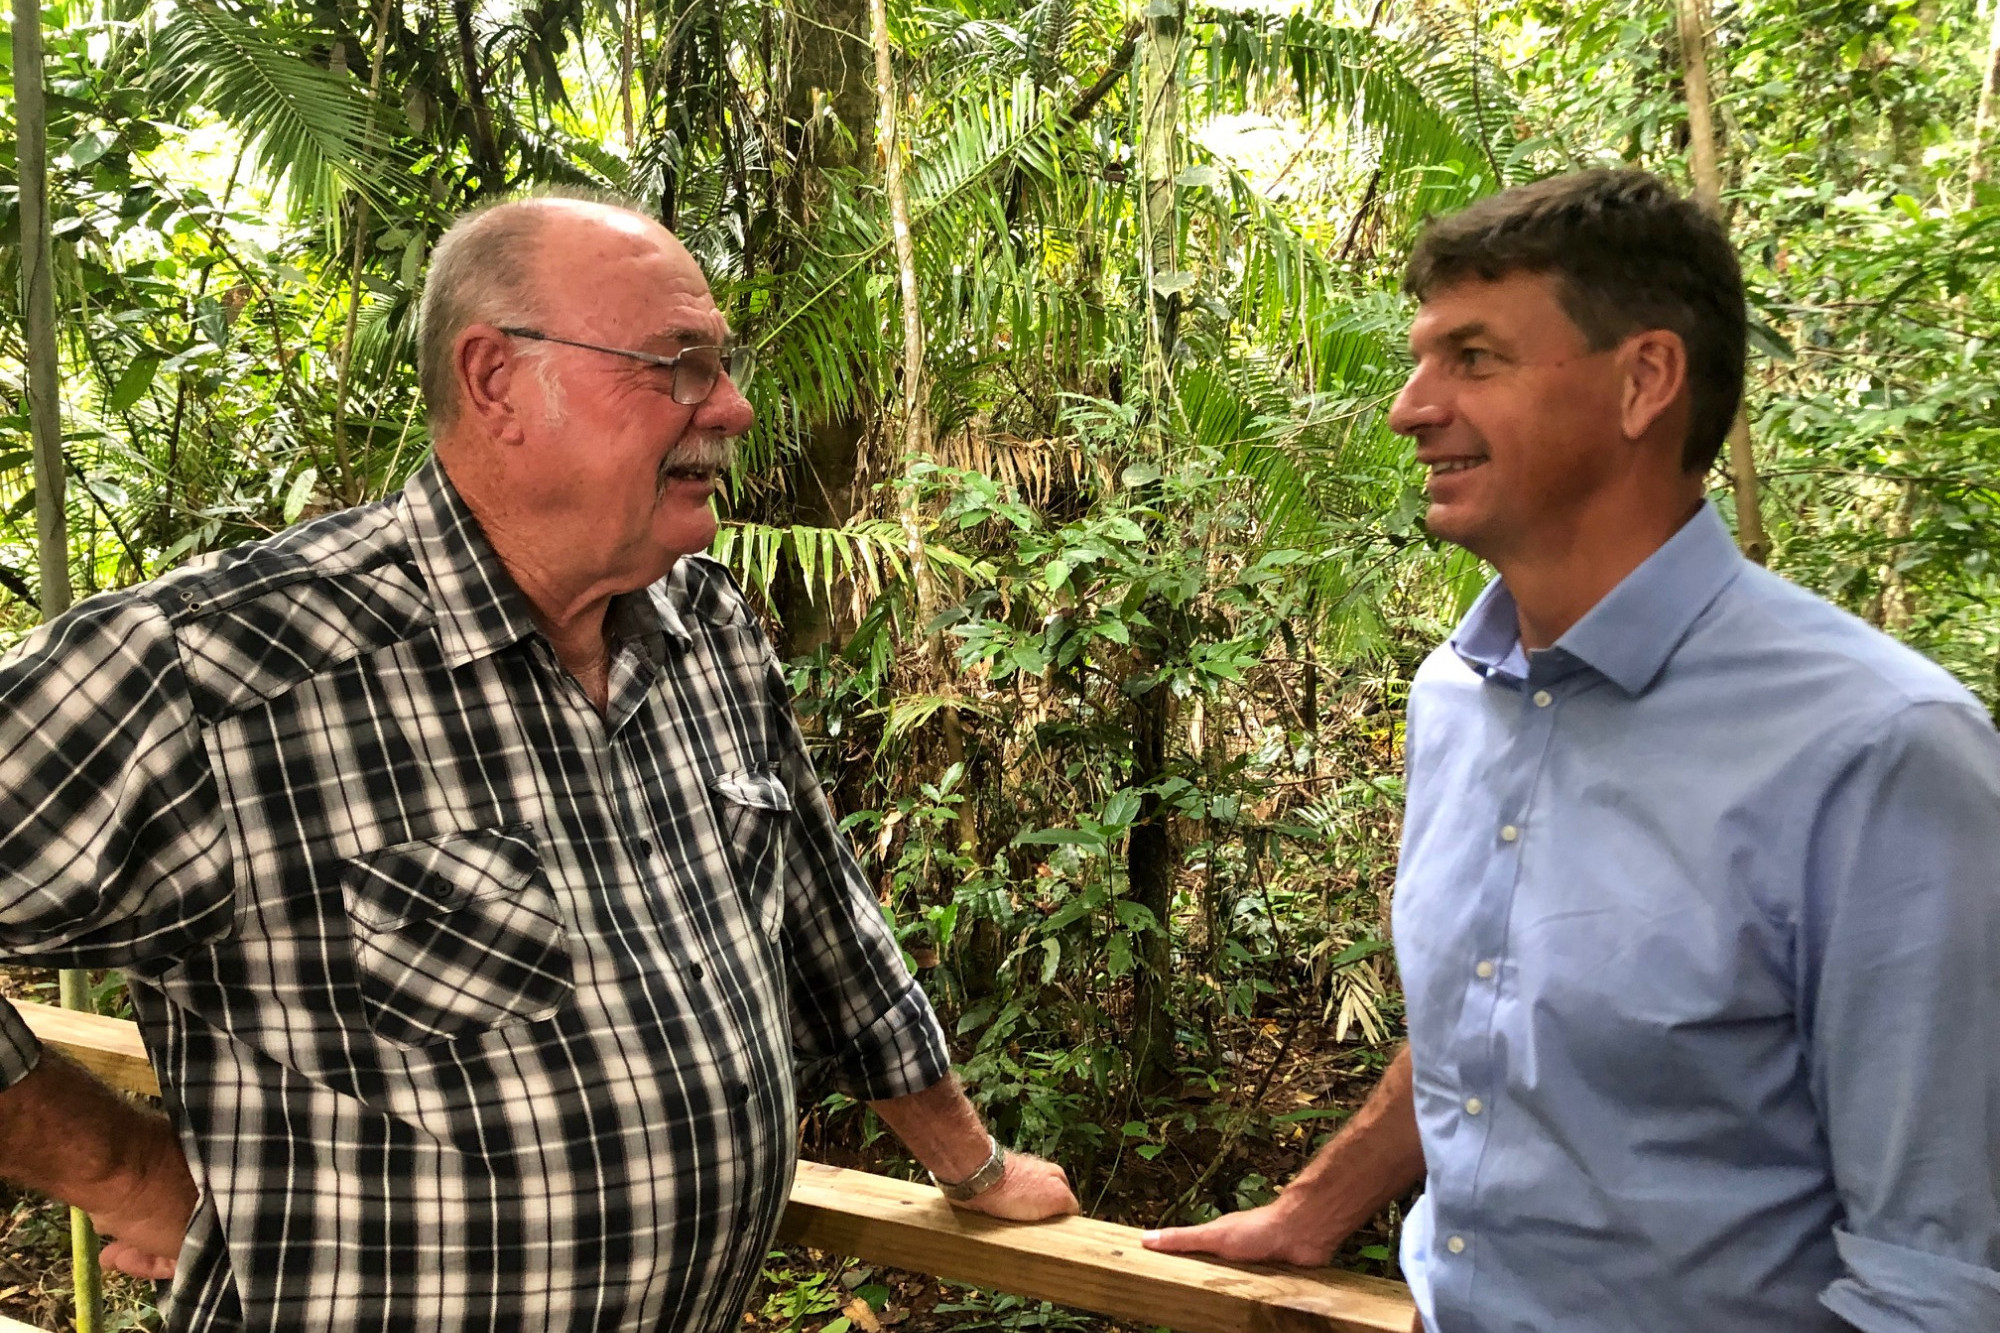 Federal Leichhardt MP Warren Entsch with Federal Energy and Emissions Reduction Minister Angus Taylor after they announced round one of the Regional and Remote Communities Reliability fund last year